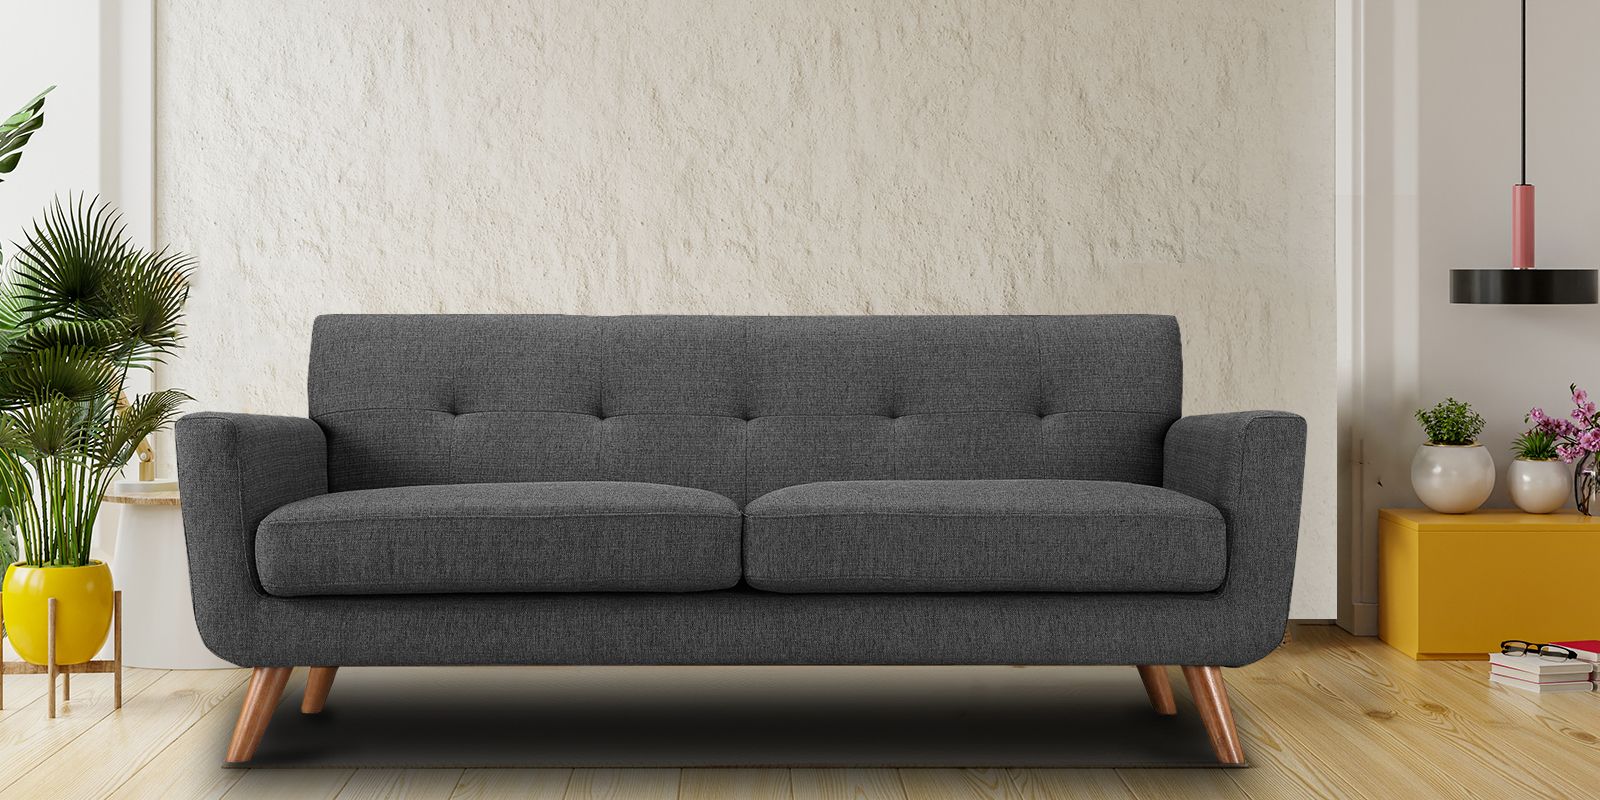 Mid Century Classic 3 Seater Sofa In Grey Colour – Dreamzz Furniture Throughout Mid Century 3 Seat Couches (Gallery 6 of 20)